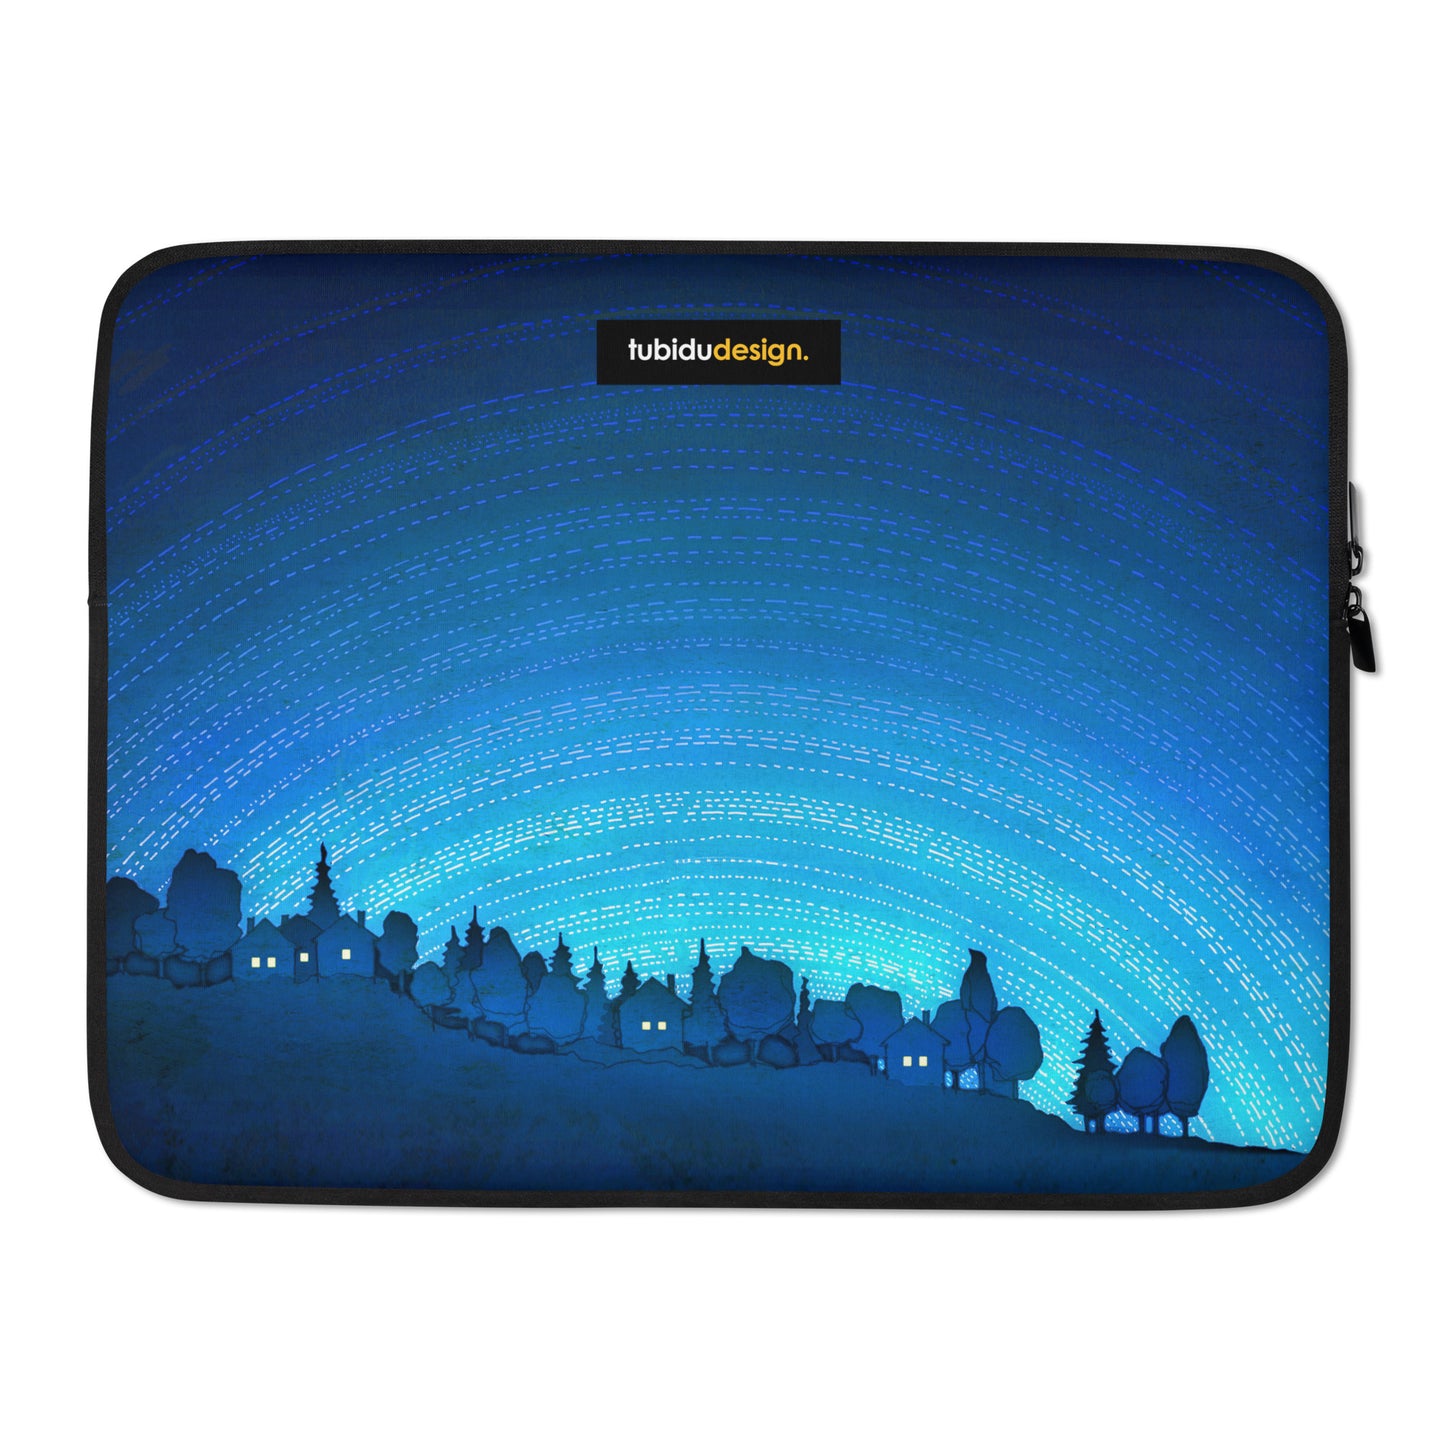 Earth calling - Illustrated Laptop Sleeve